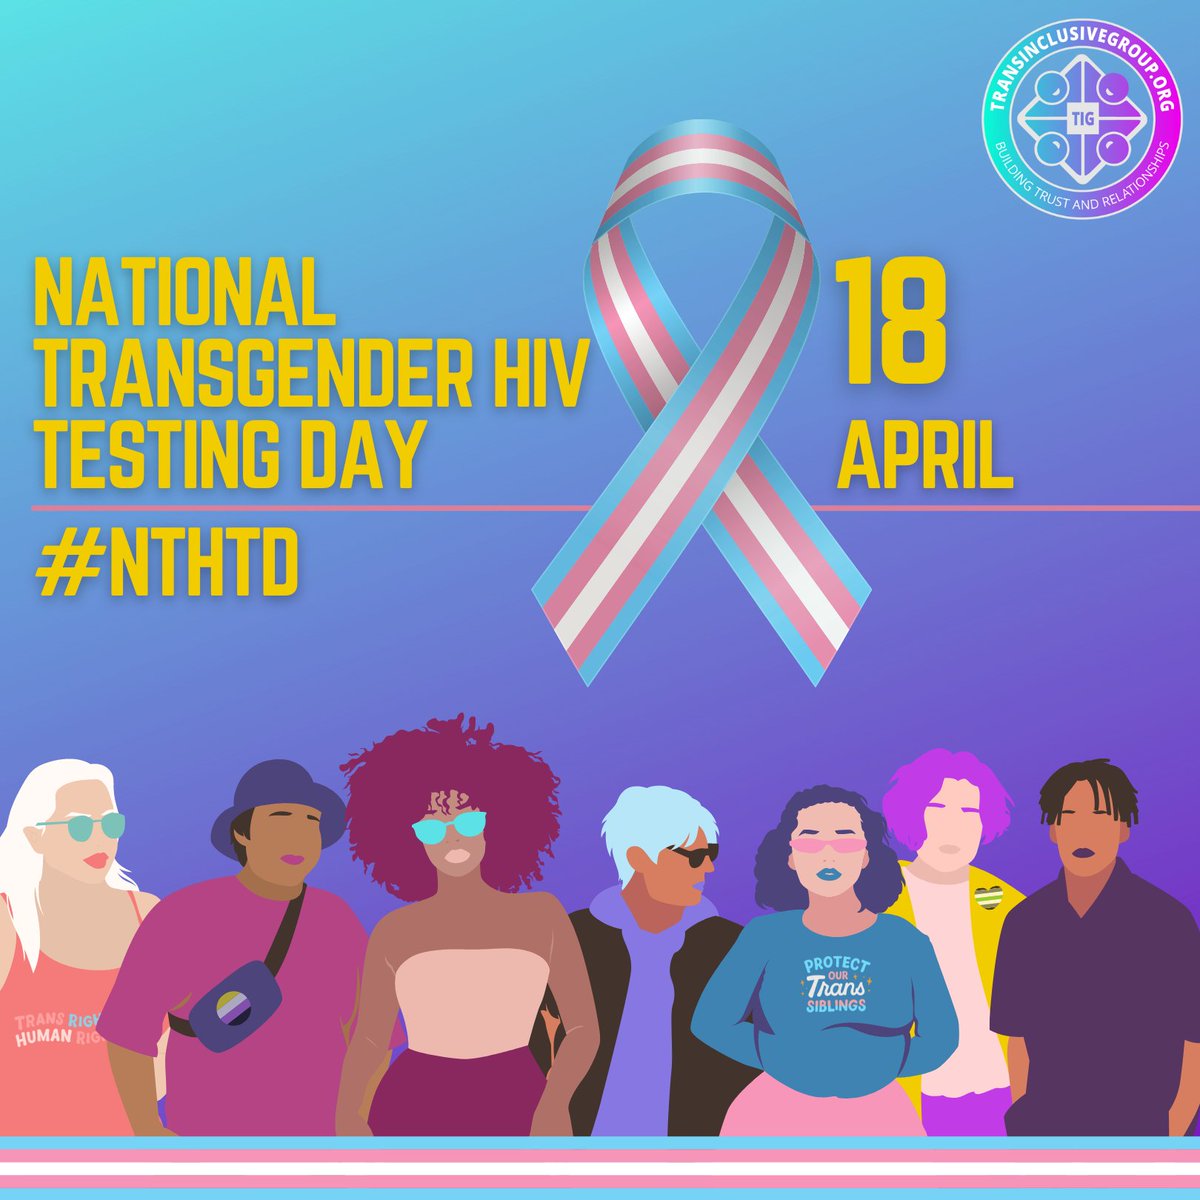 Today is National Transgender HIV Testing Day, a day to address the impact of HIV on trans & nonbinary people. #NTHTD

We can all do our part to reduce HIV stigma & promote testing, prevention, & treatment - knowing your HIV status is a key step to taking charge of your health!